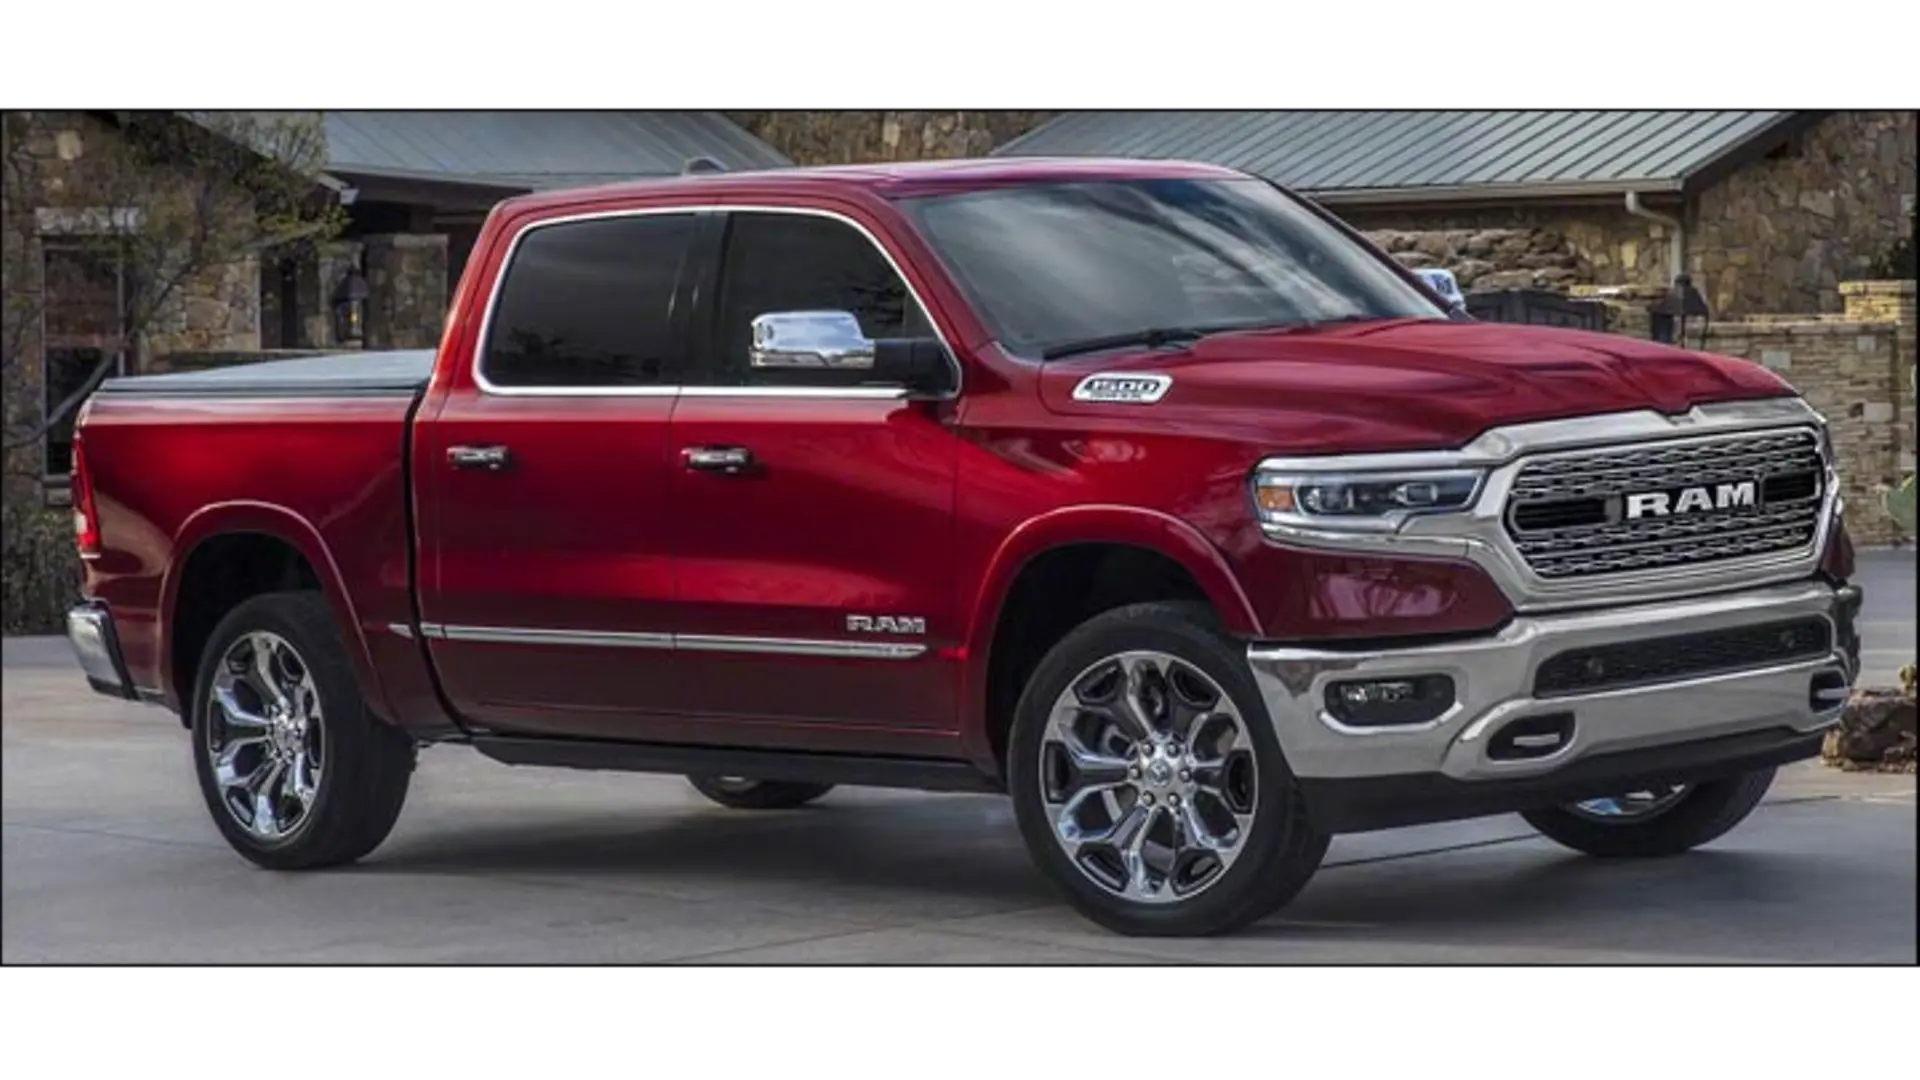 The 2019 Ram 1500 features Adhesive Technologies products in its all-new design.